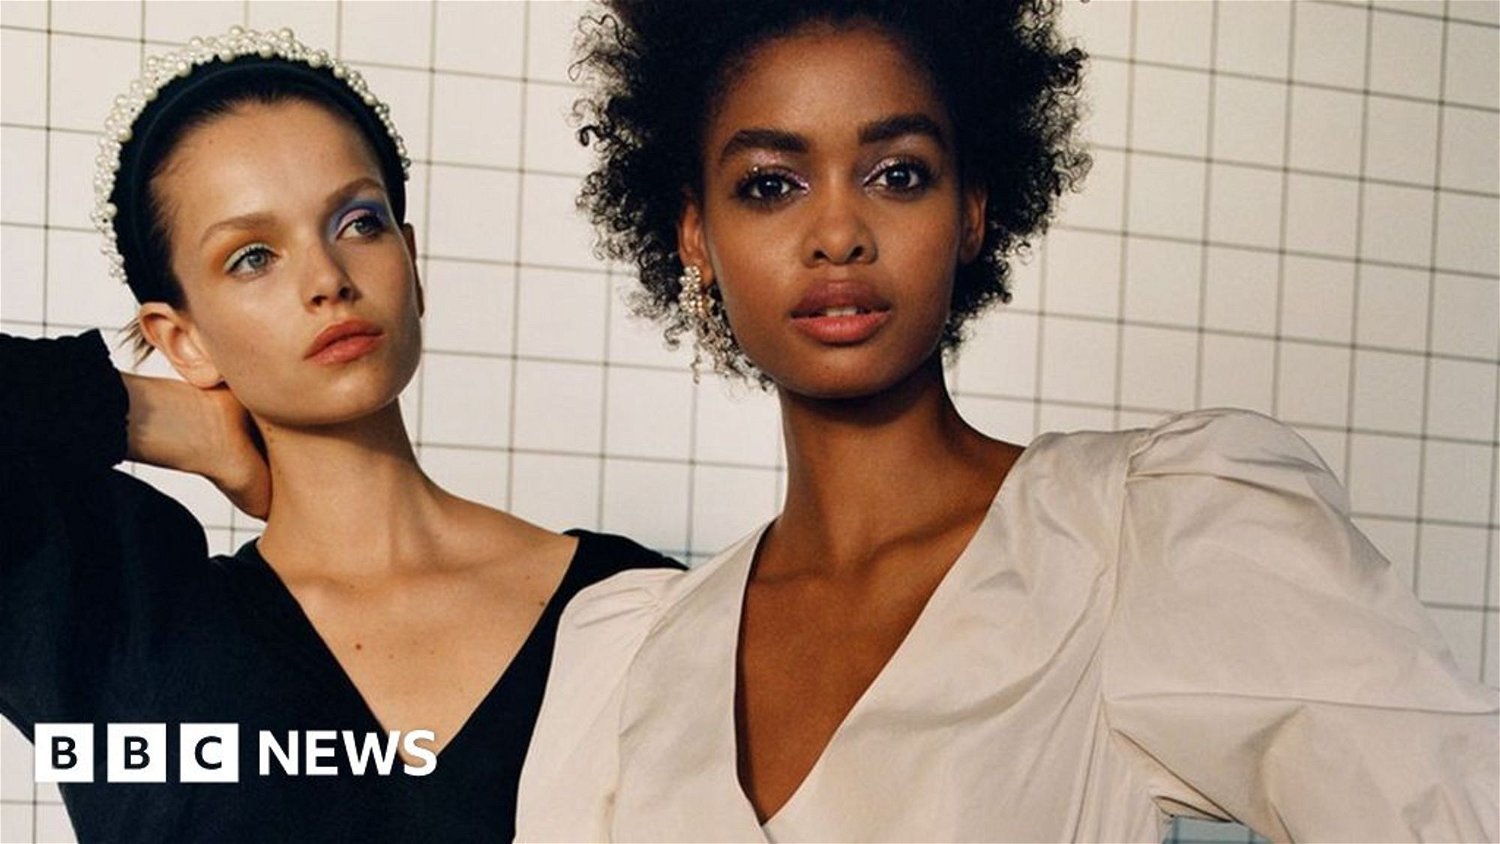 Zara uncovered: Inside the brand that changed fashion